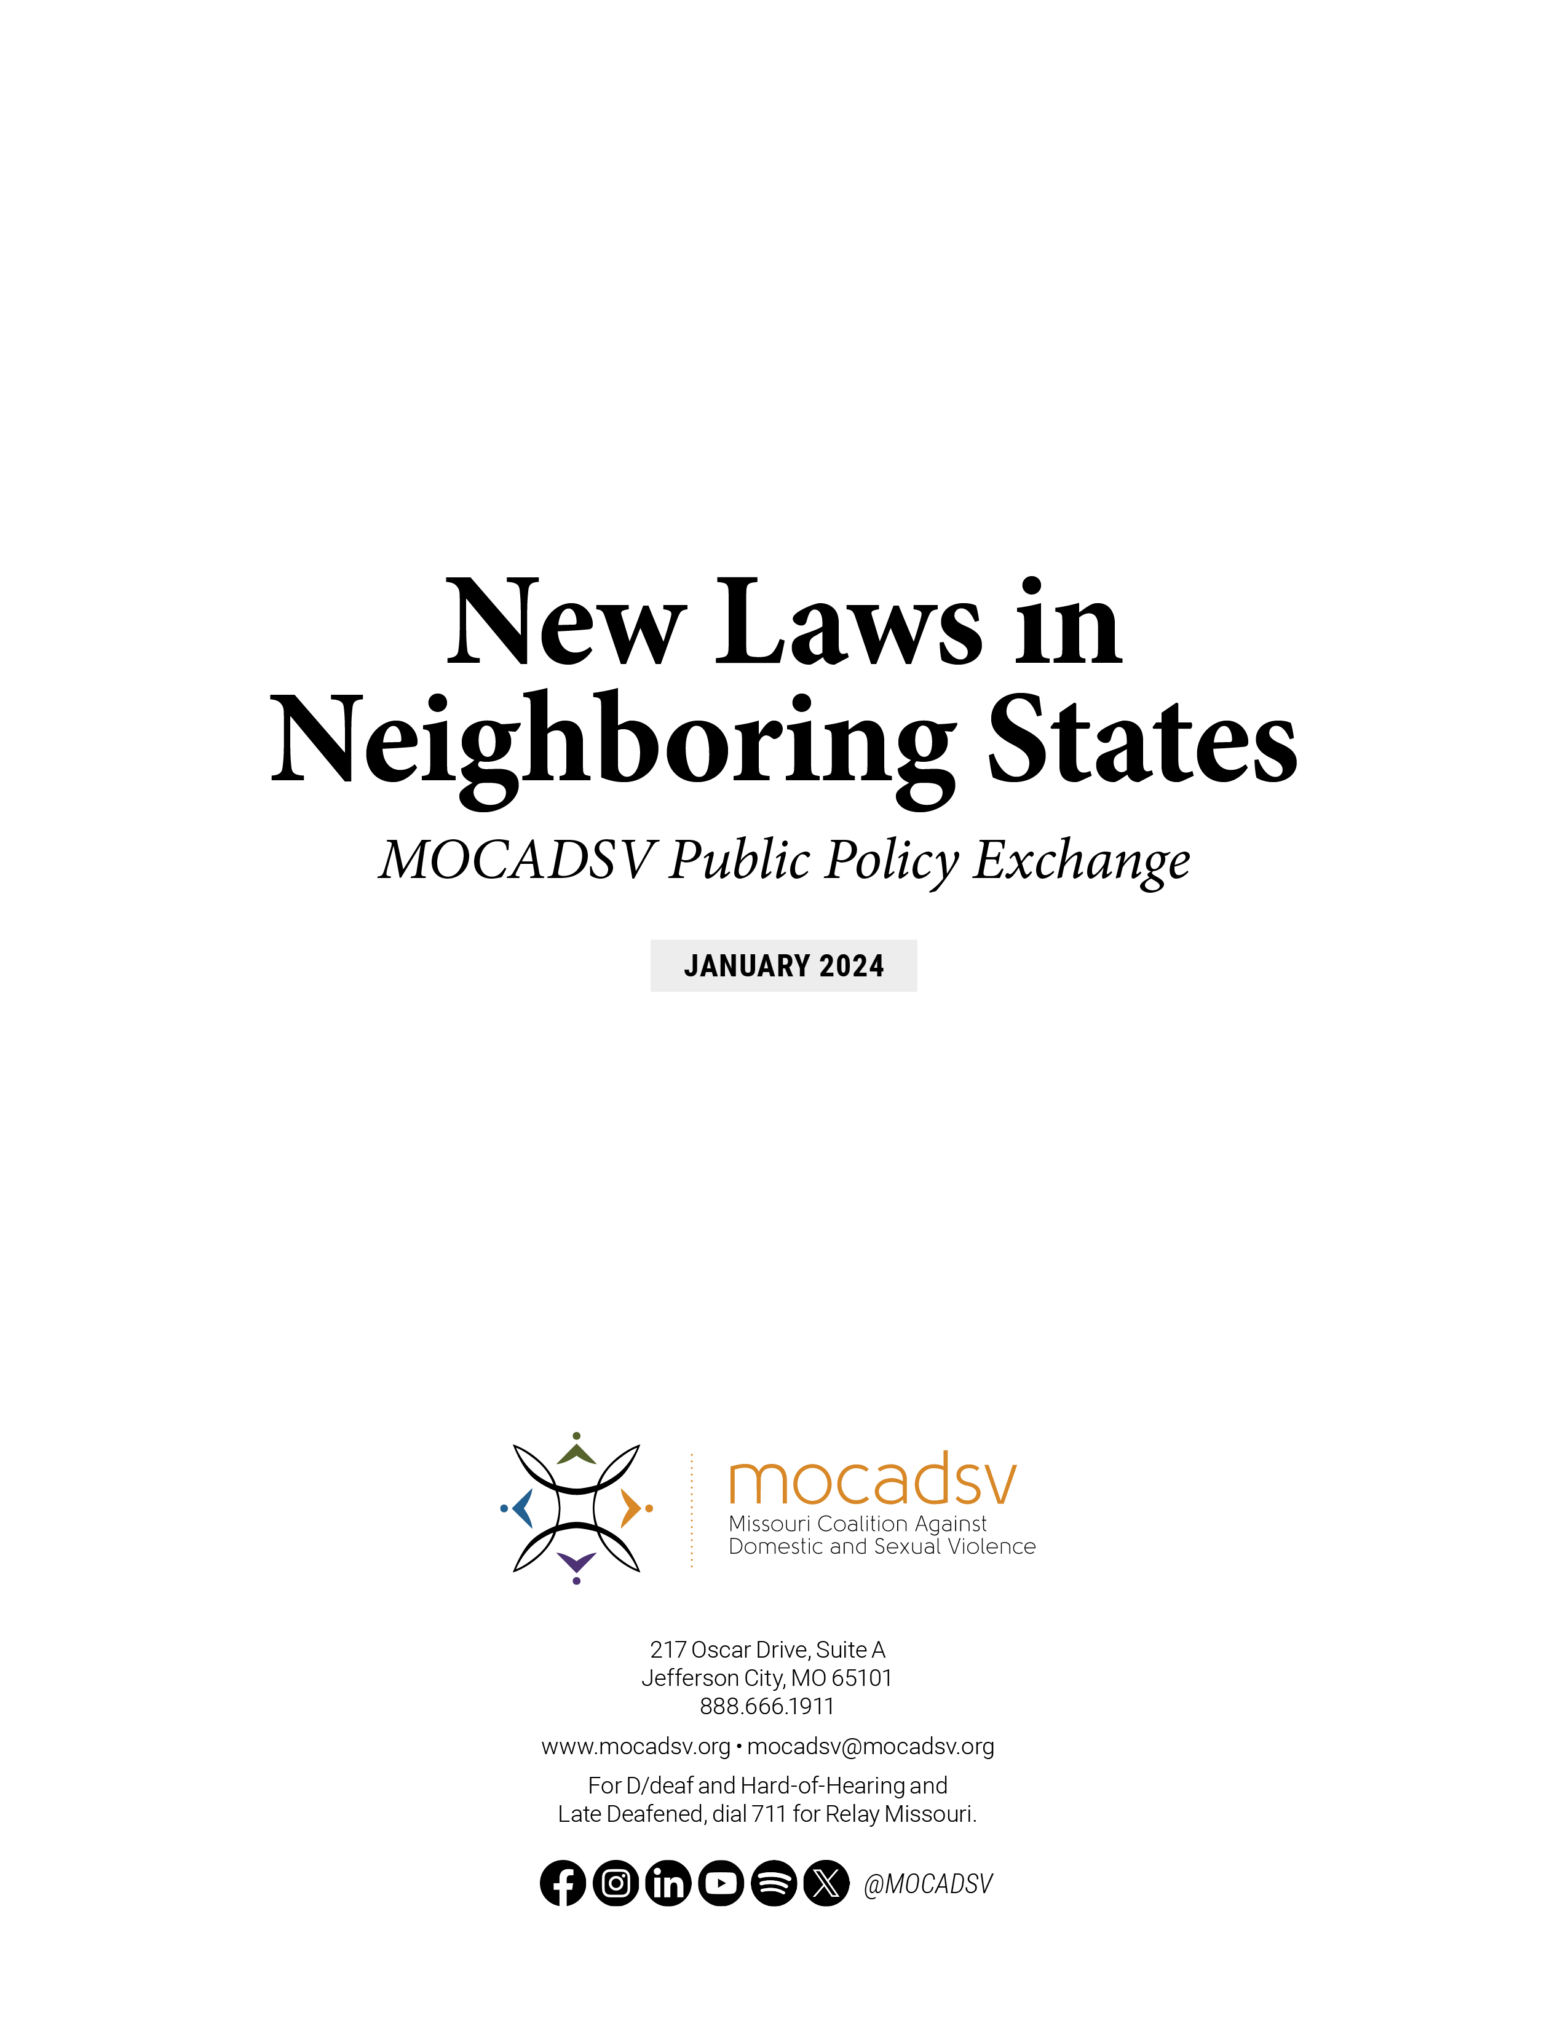 New Laws in Neighboring States Publication Cover